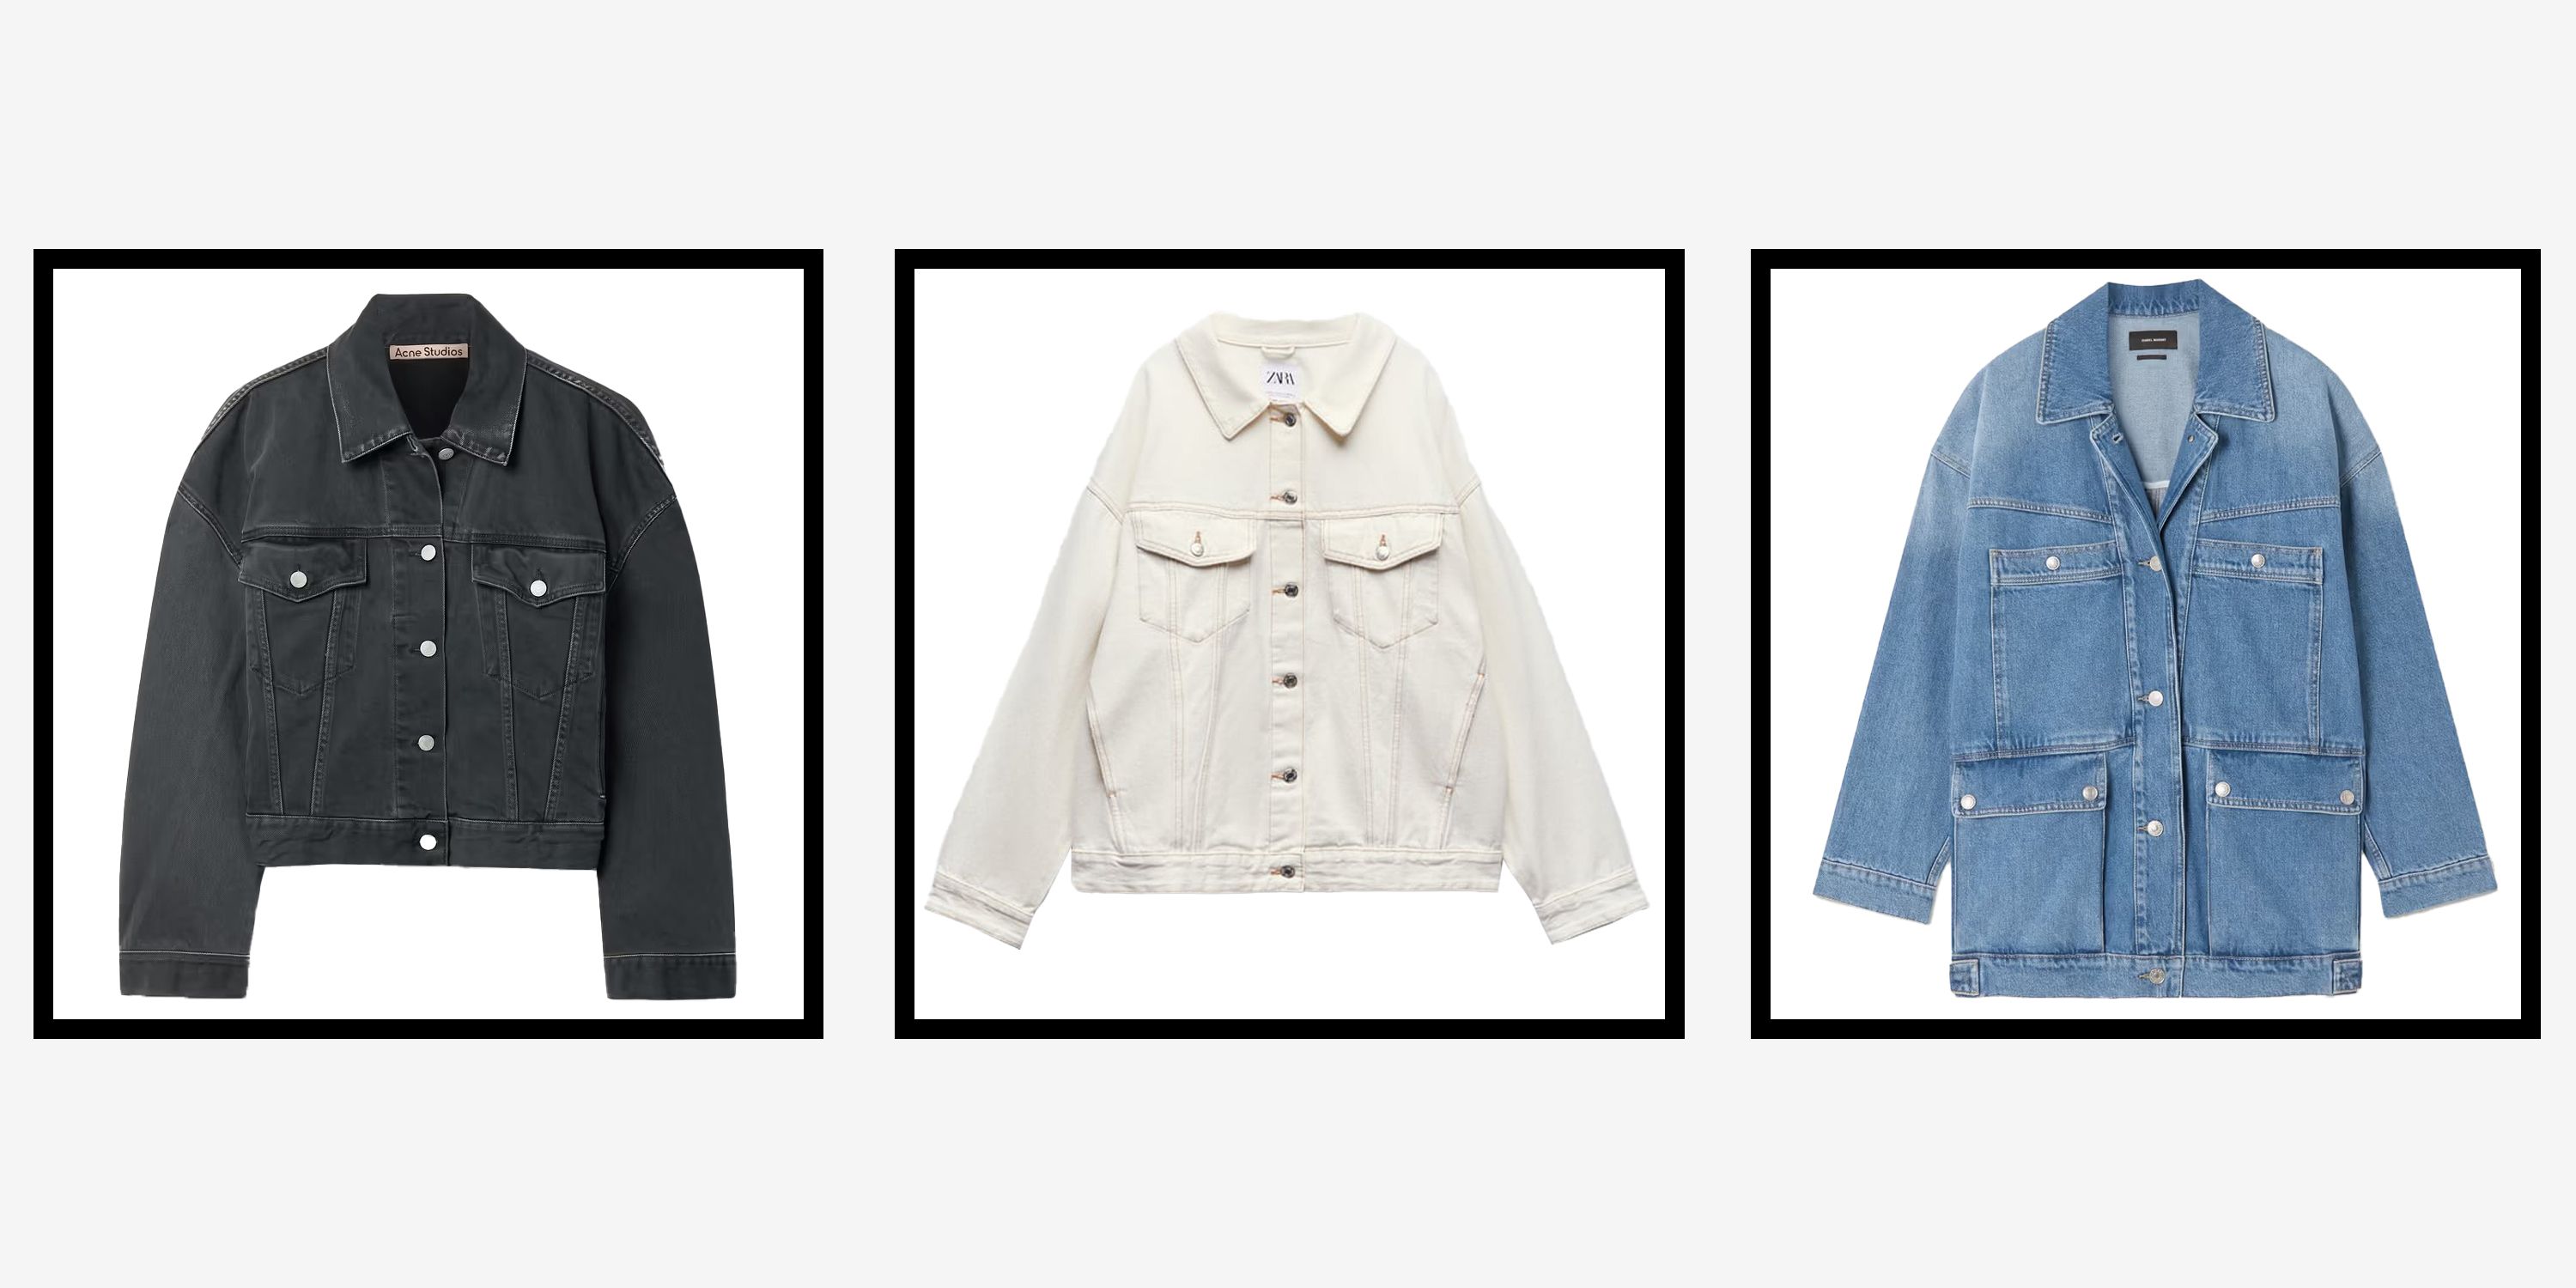 21 Oversized Denim Jackets Ideal for Summer Layering